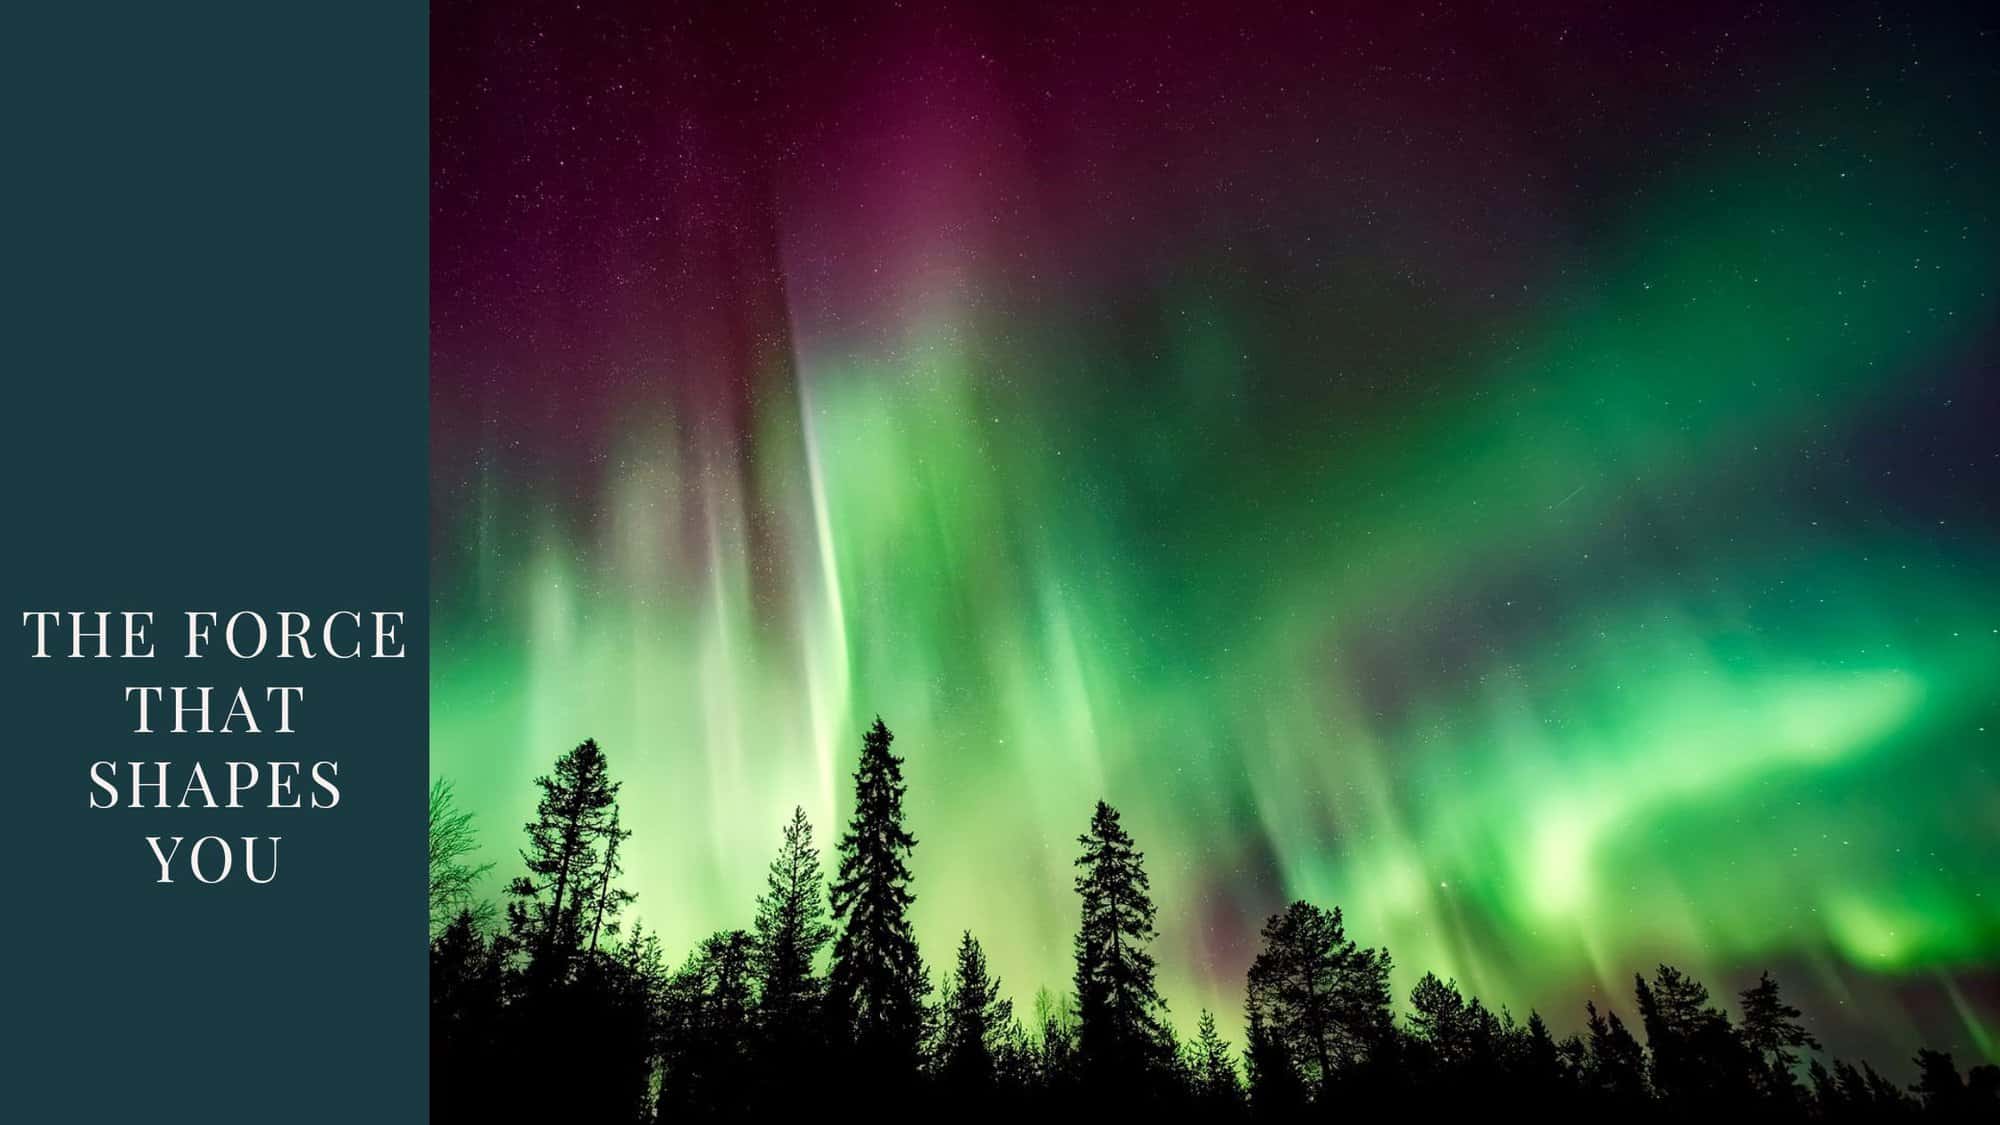 Blog the force that shapes us - light green swirls of auroris borealis over pine trees